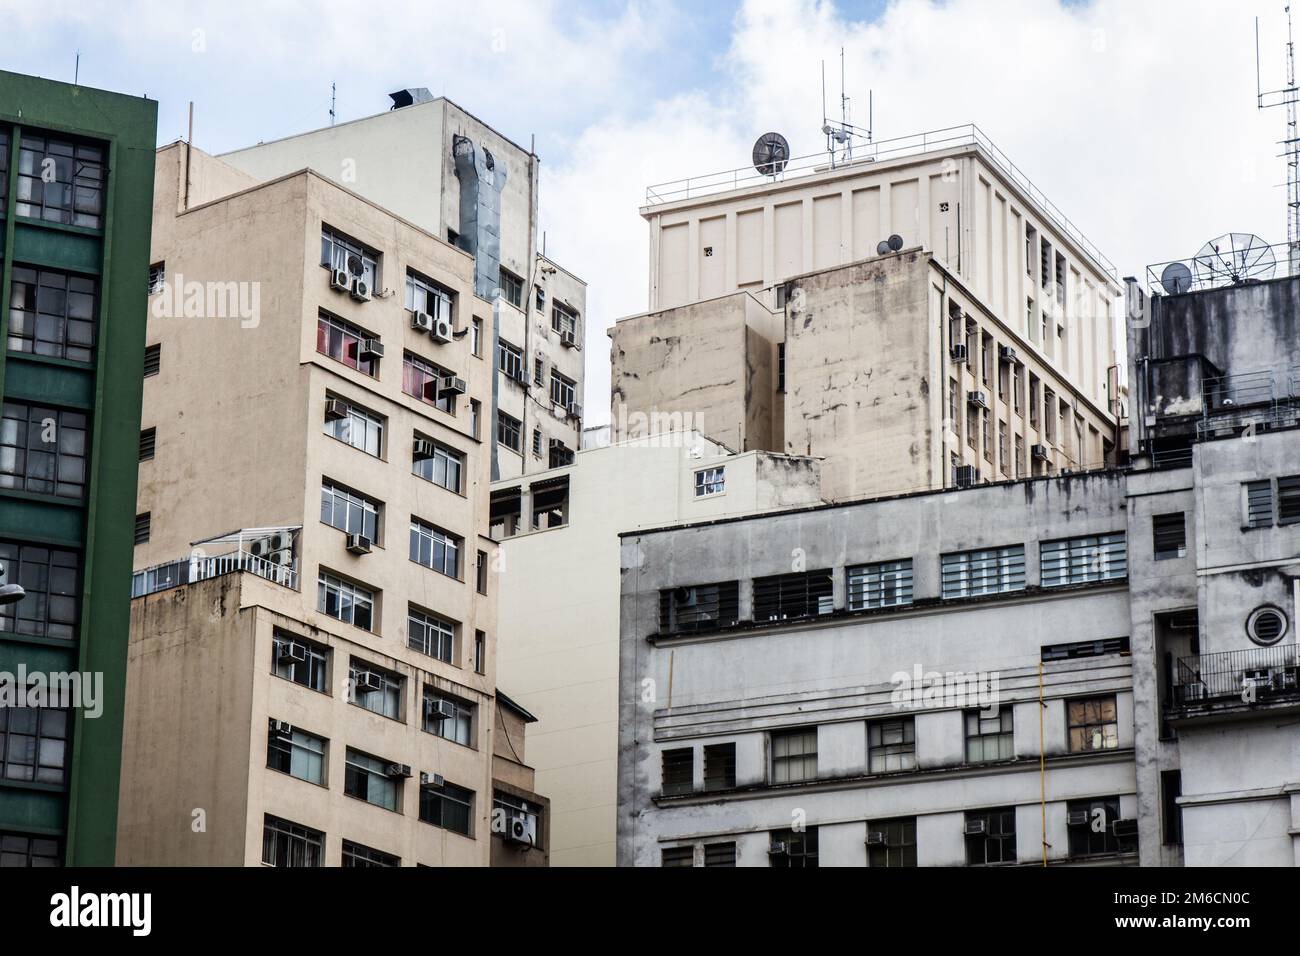 Low angle view of old residential concrete buildings Stock Photo